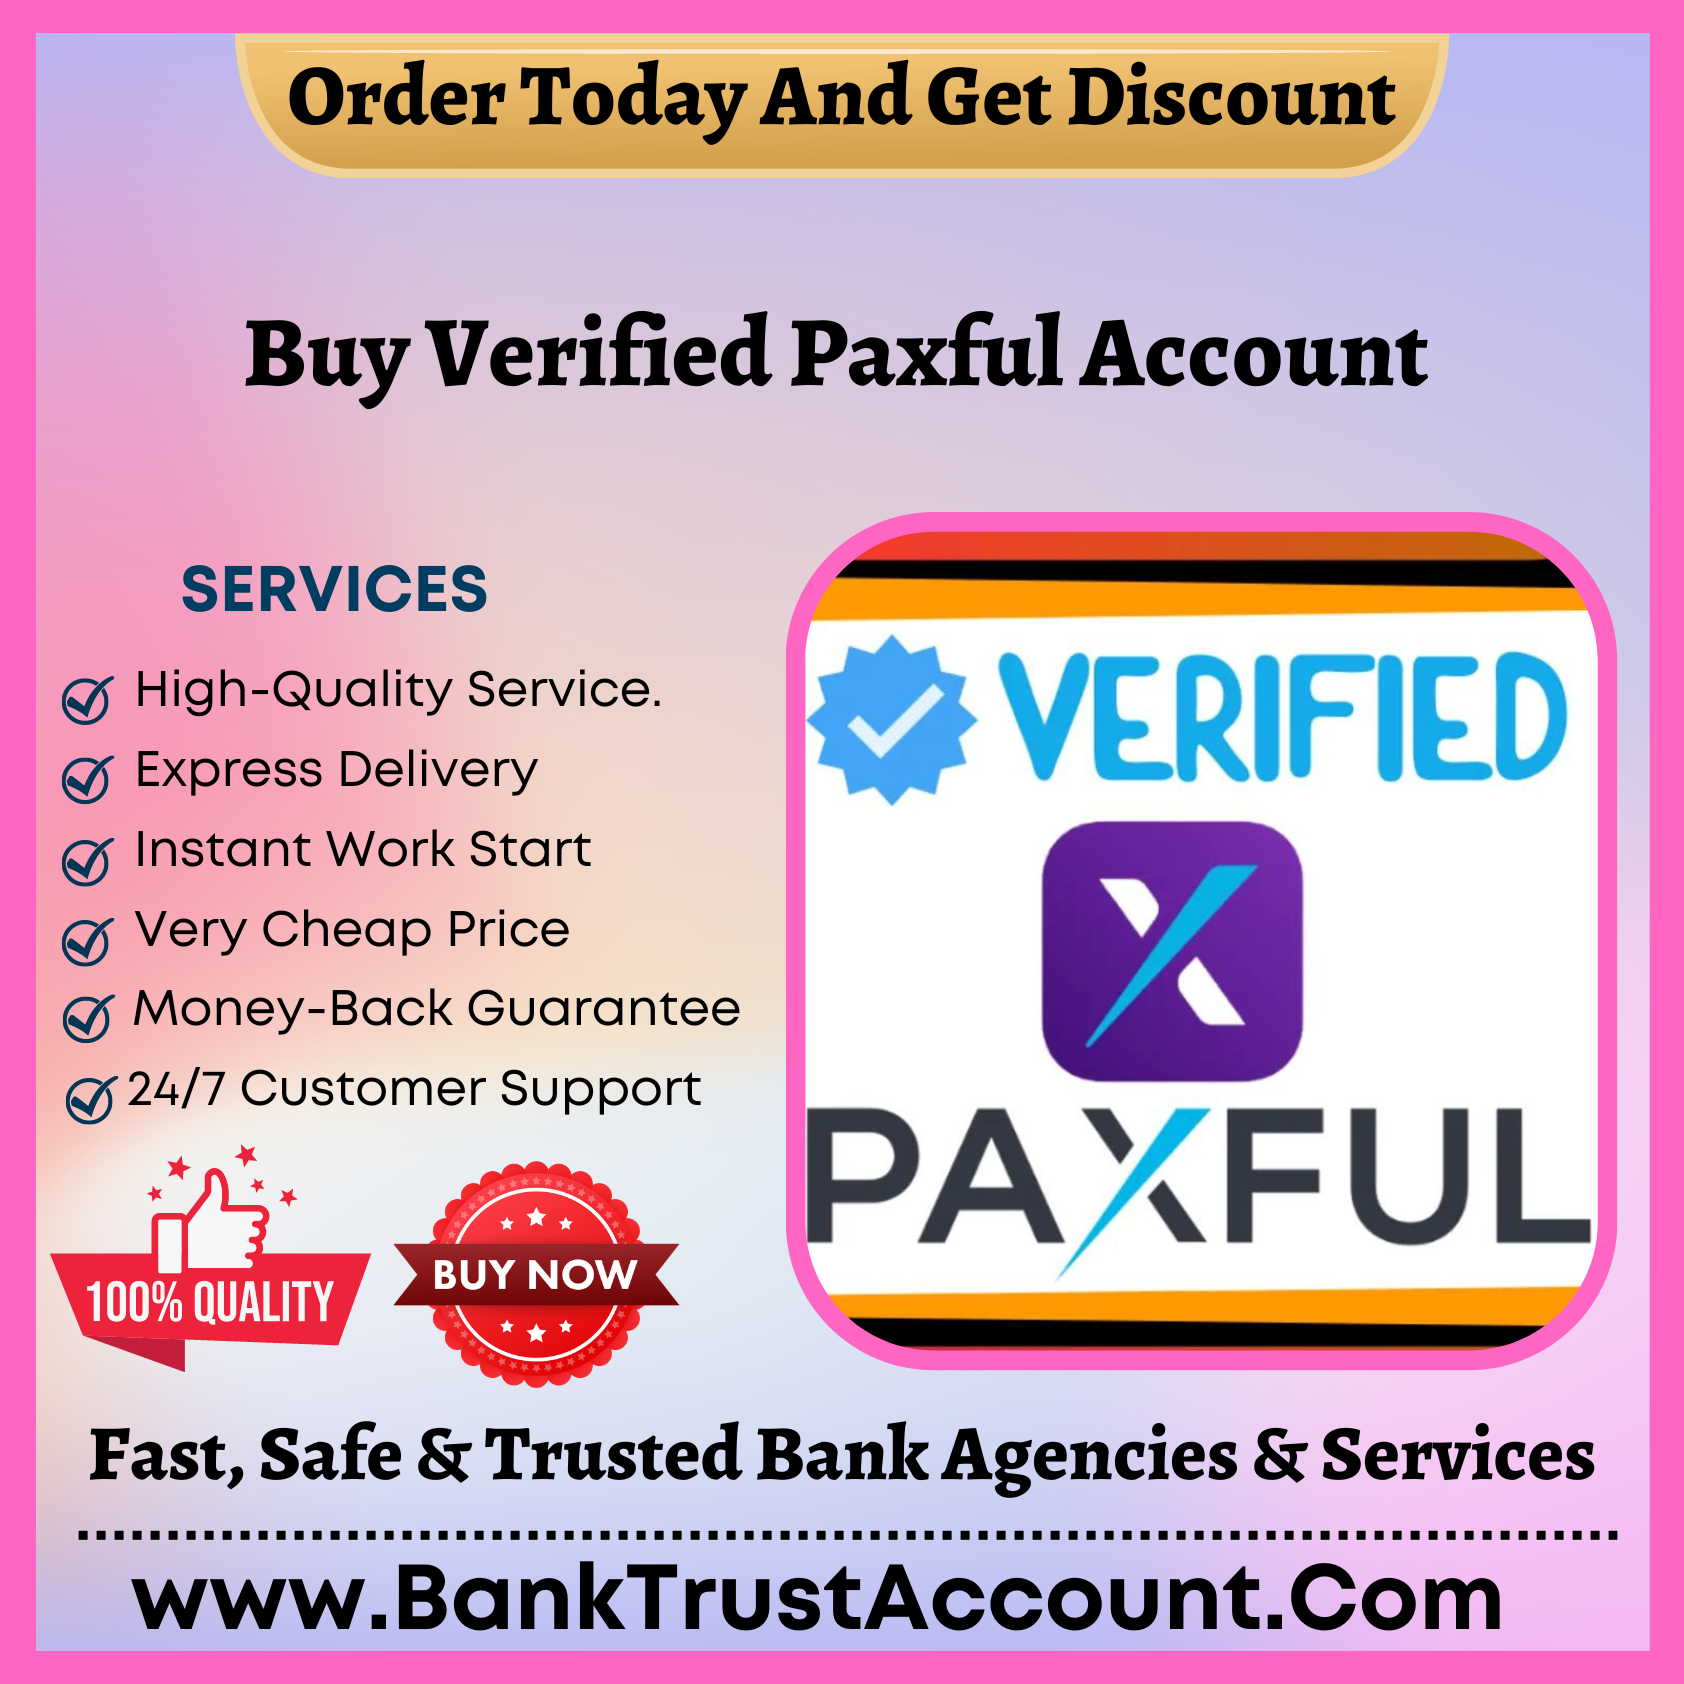 Buy Verified Paxful Account - Bank Trust Account